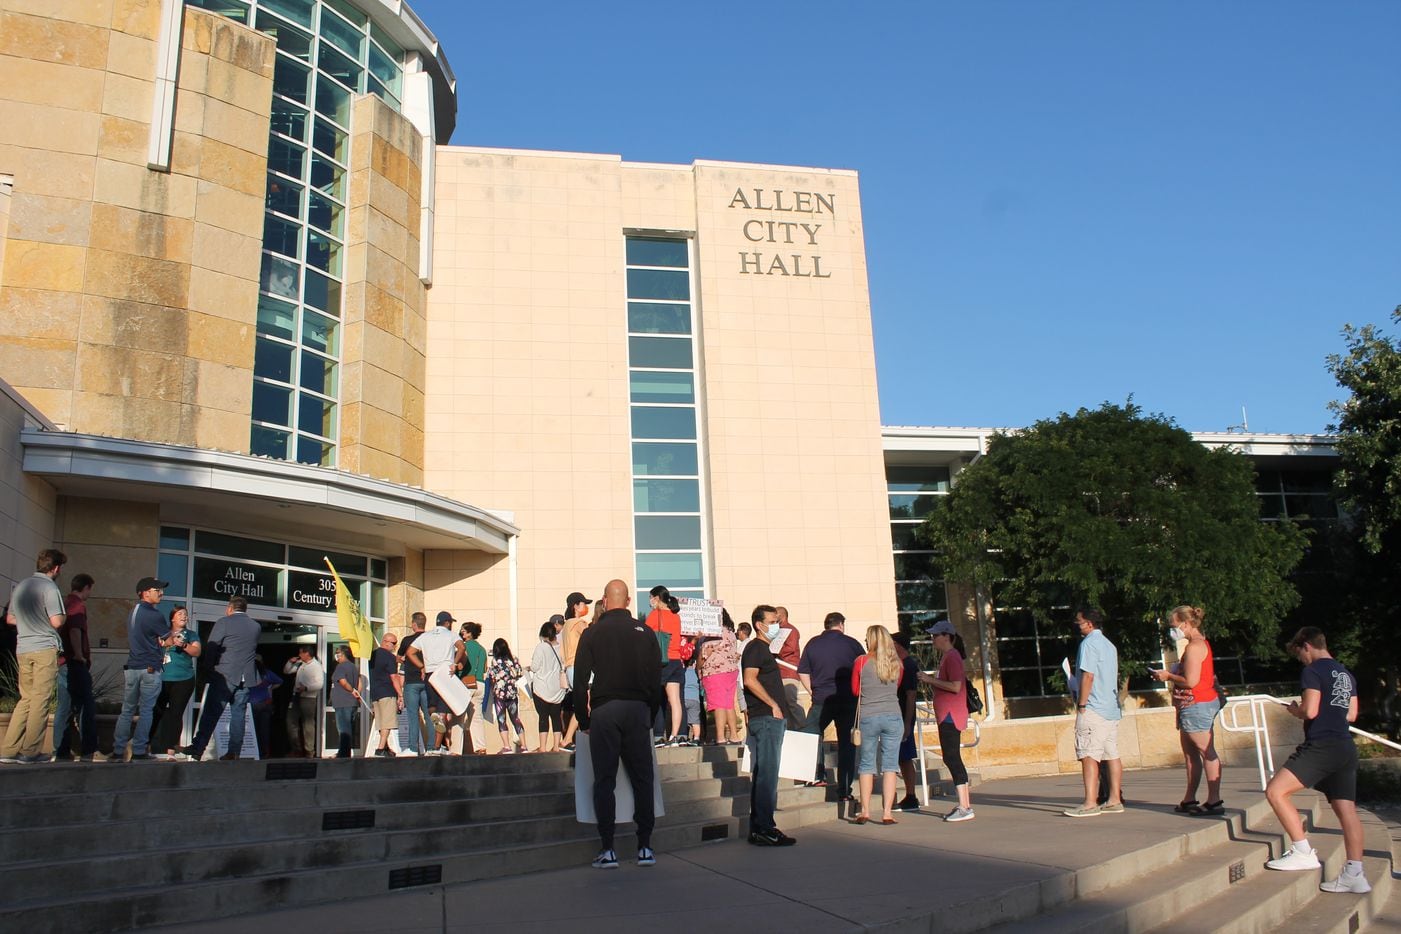 Allen ISD parents gather outside city hall for the Allen ISD board of trustees meeting on Monday, August 23. Before the meeting started, the fire marshal said the building reached capacity and stopped admitting people into city hall. A line of parents and community members, both in support of and protesting current district COVID-19 policies, lined up from the door out to the parking lot.